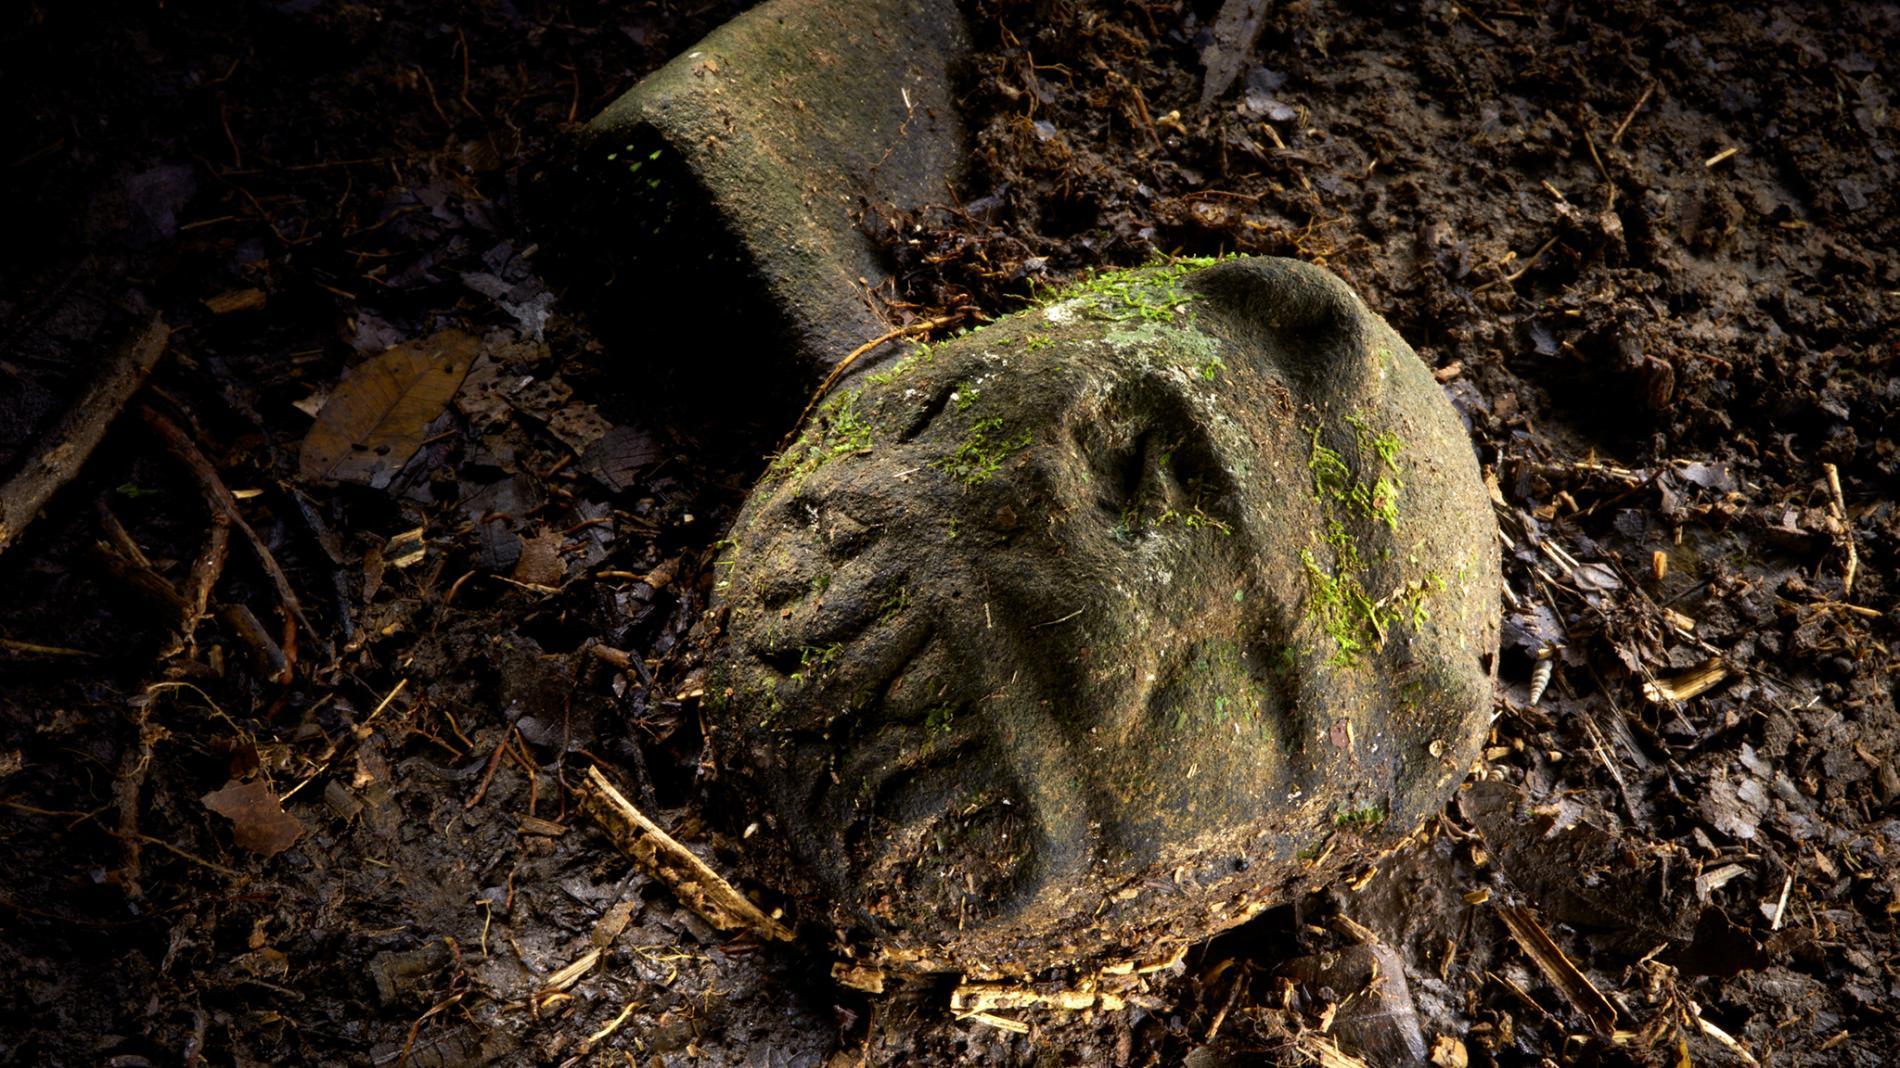 The jaguar head as it first appeared emerging from the ground.